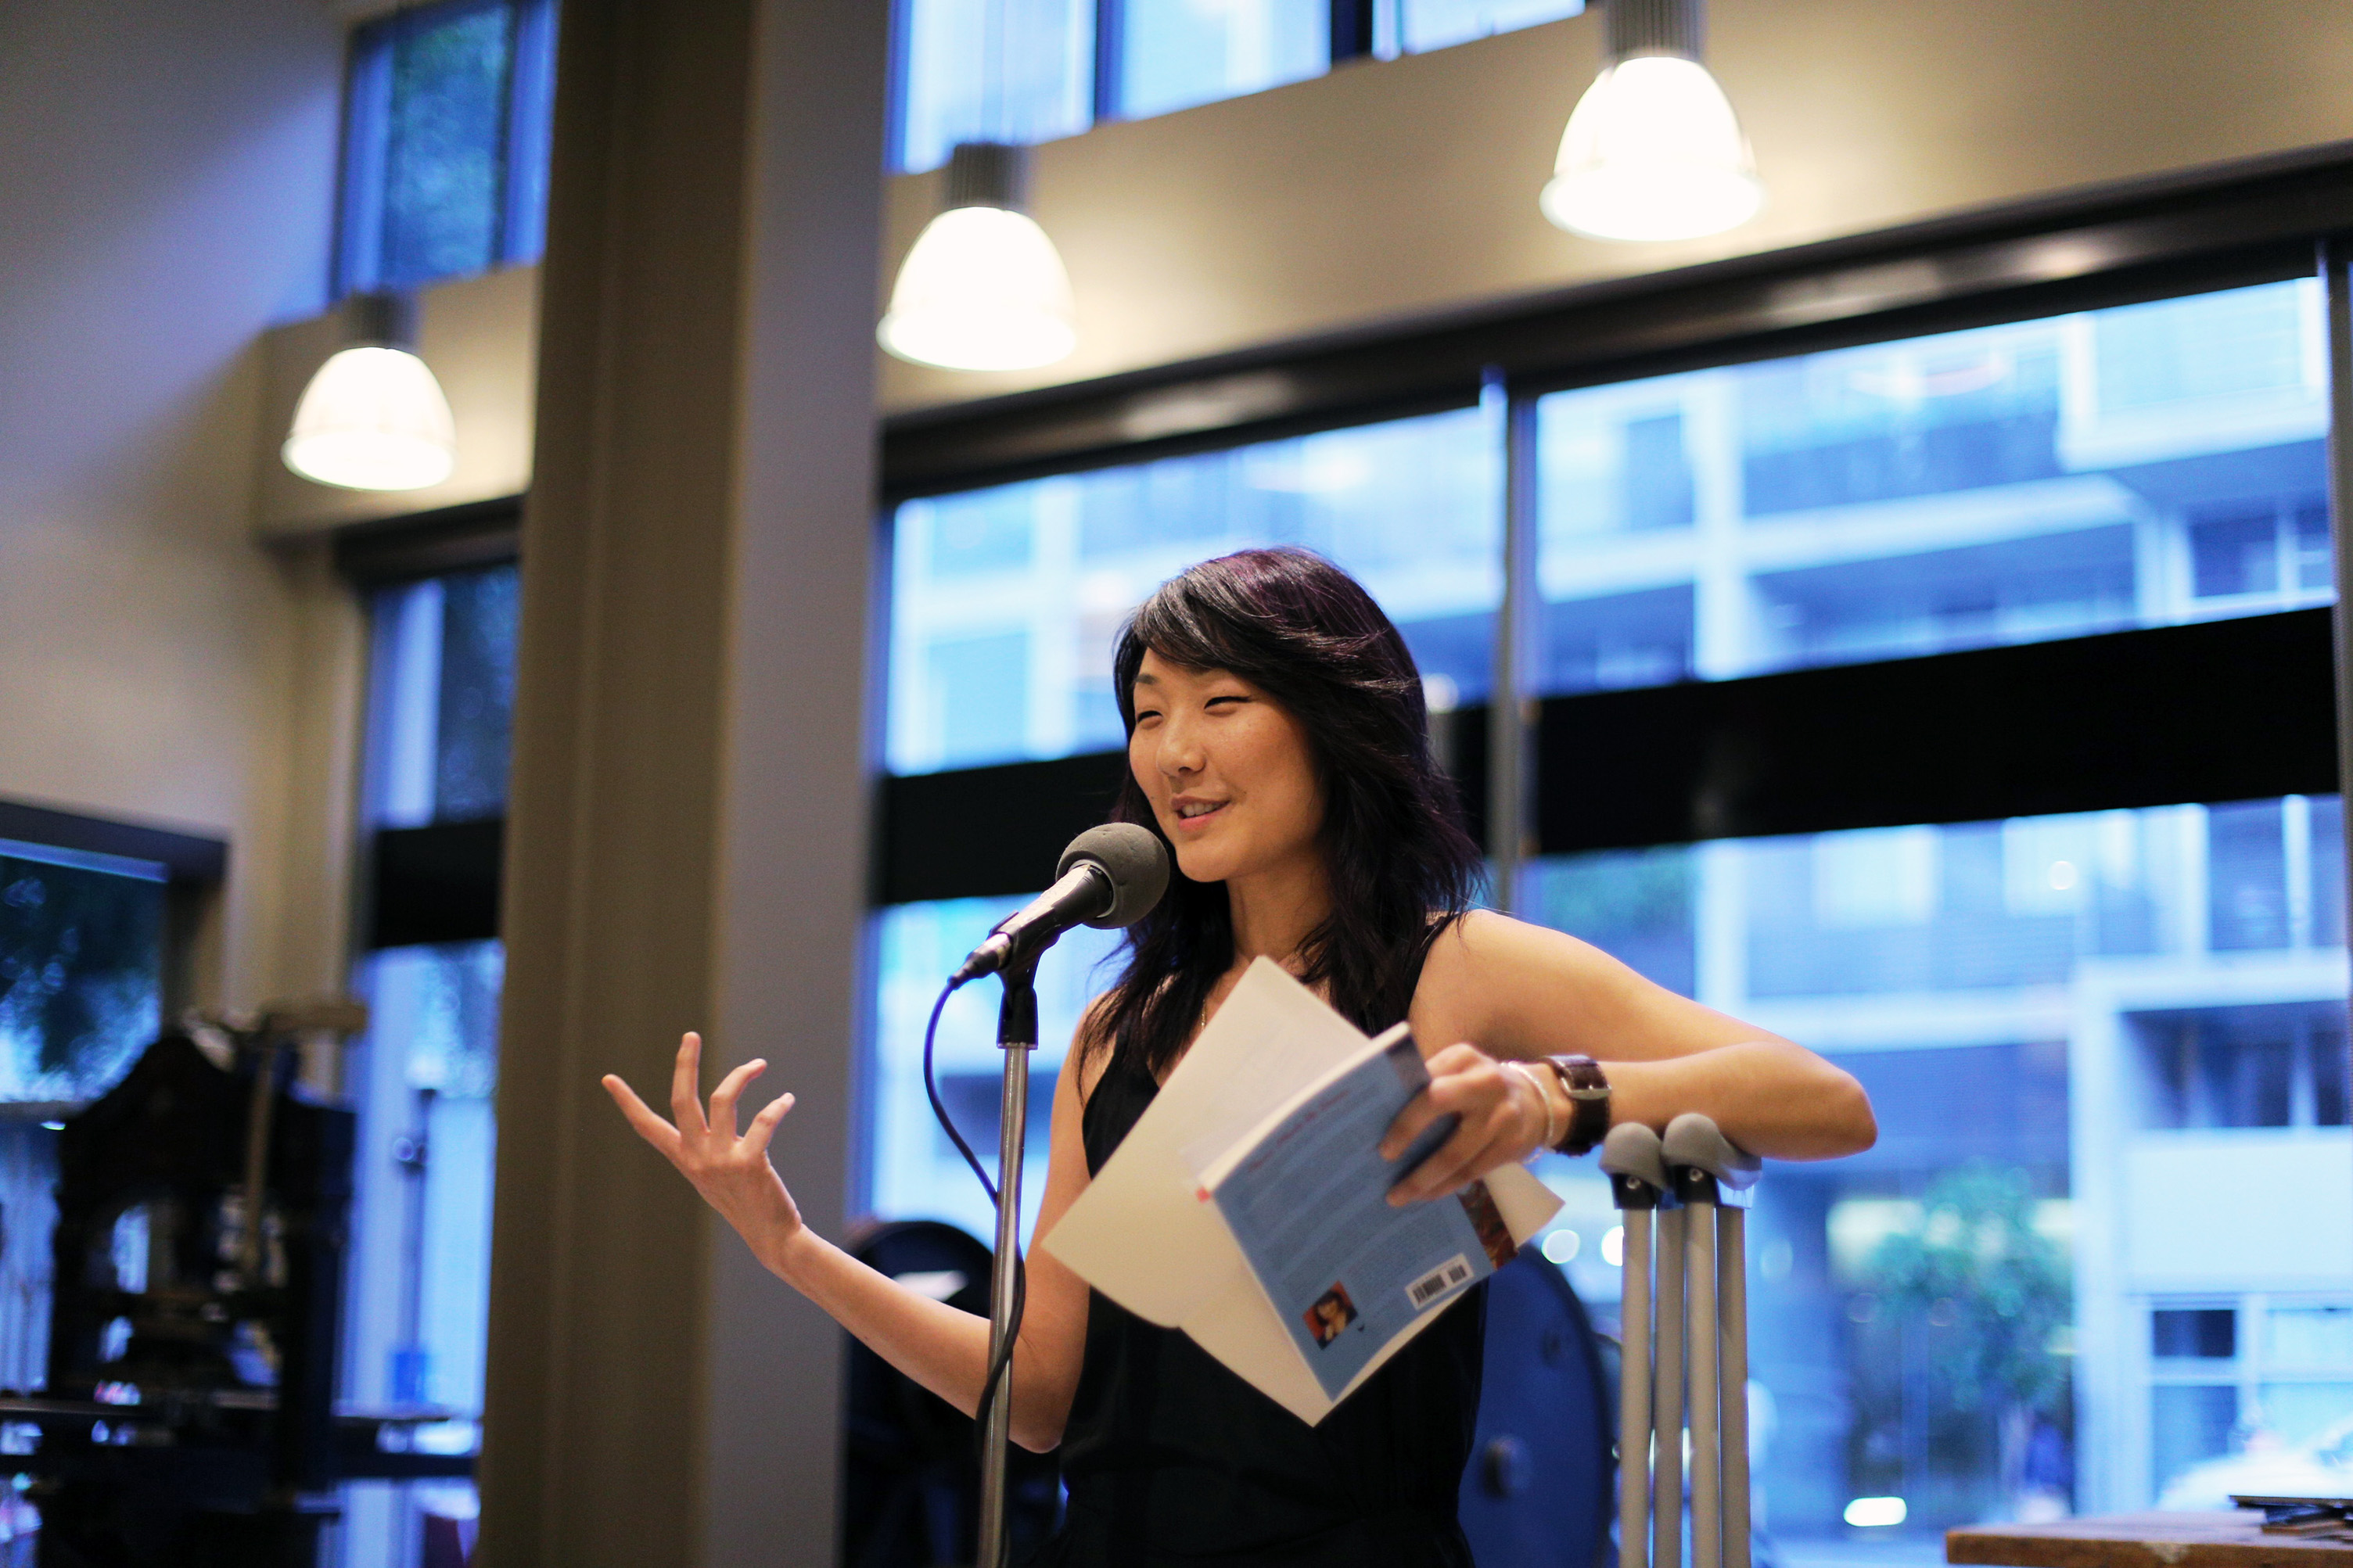 Grace under fire. Brynn Saito reads at the American Bookbinders Museum despite an injured hip